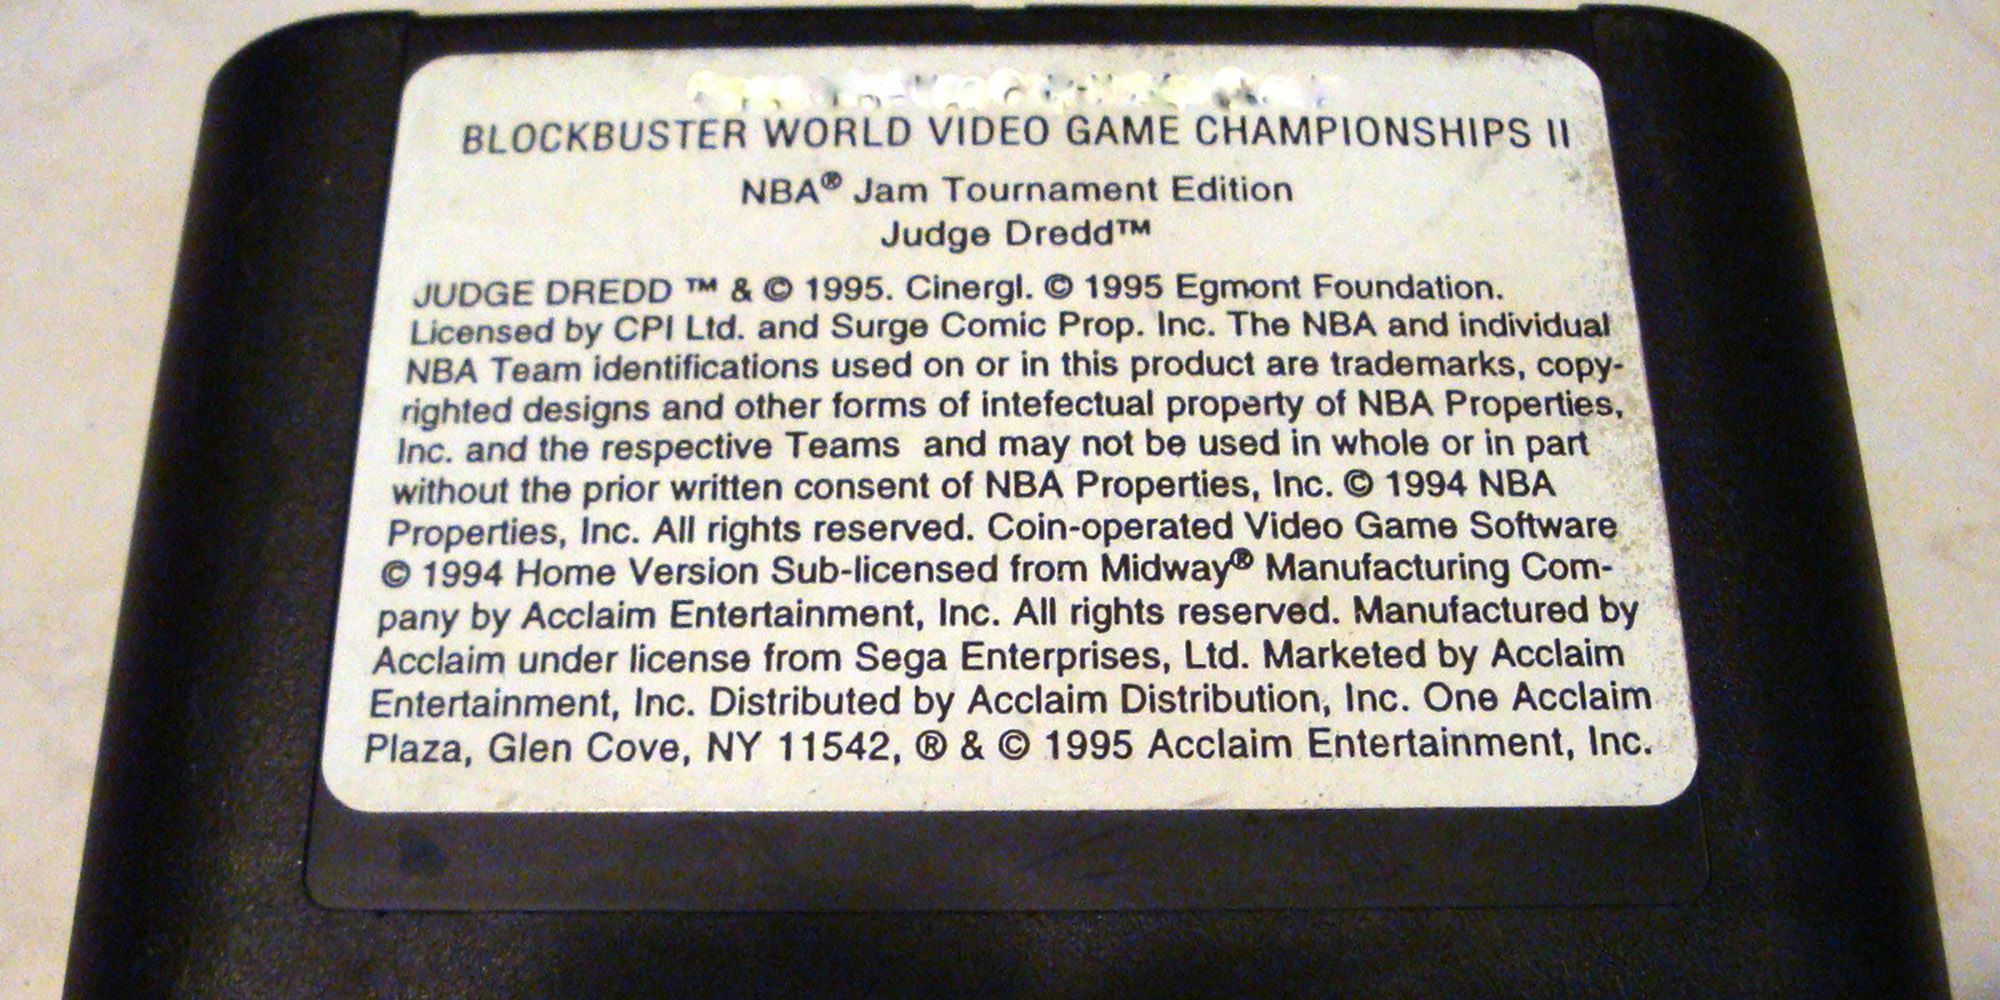 The beautiful cover art for the Blockbuster World Video Game Championship II